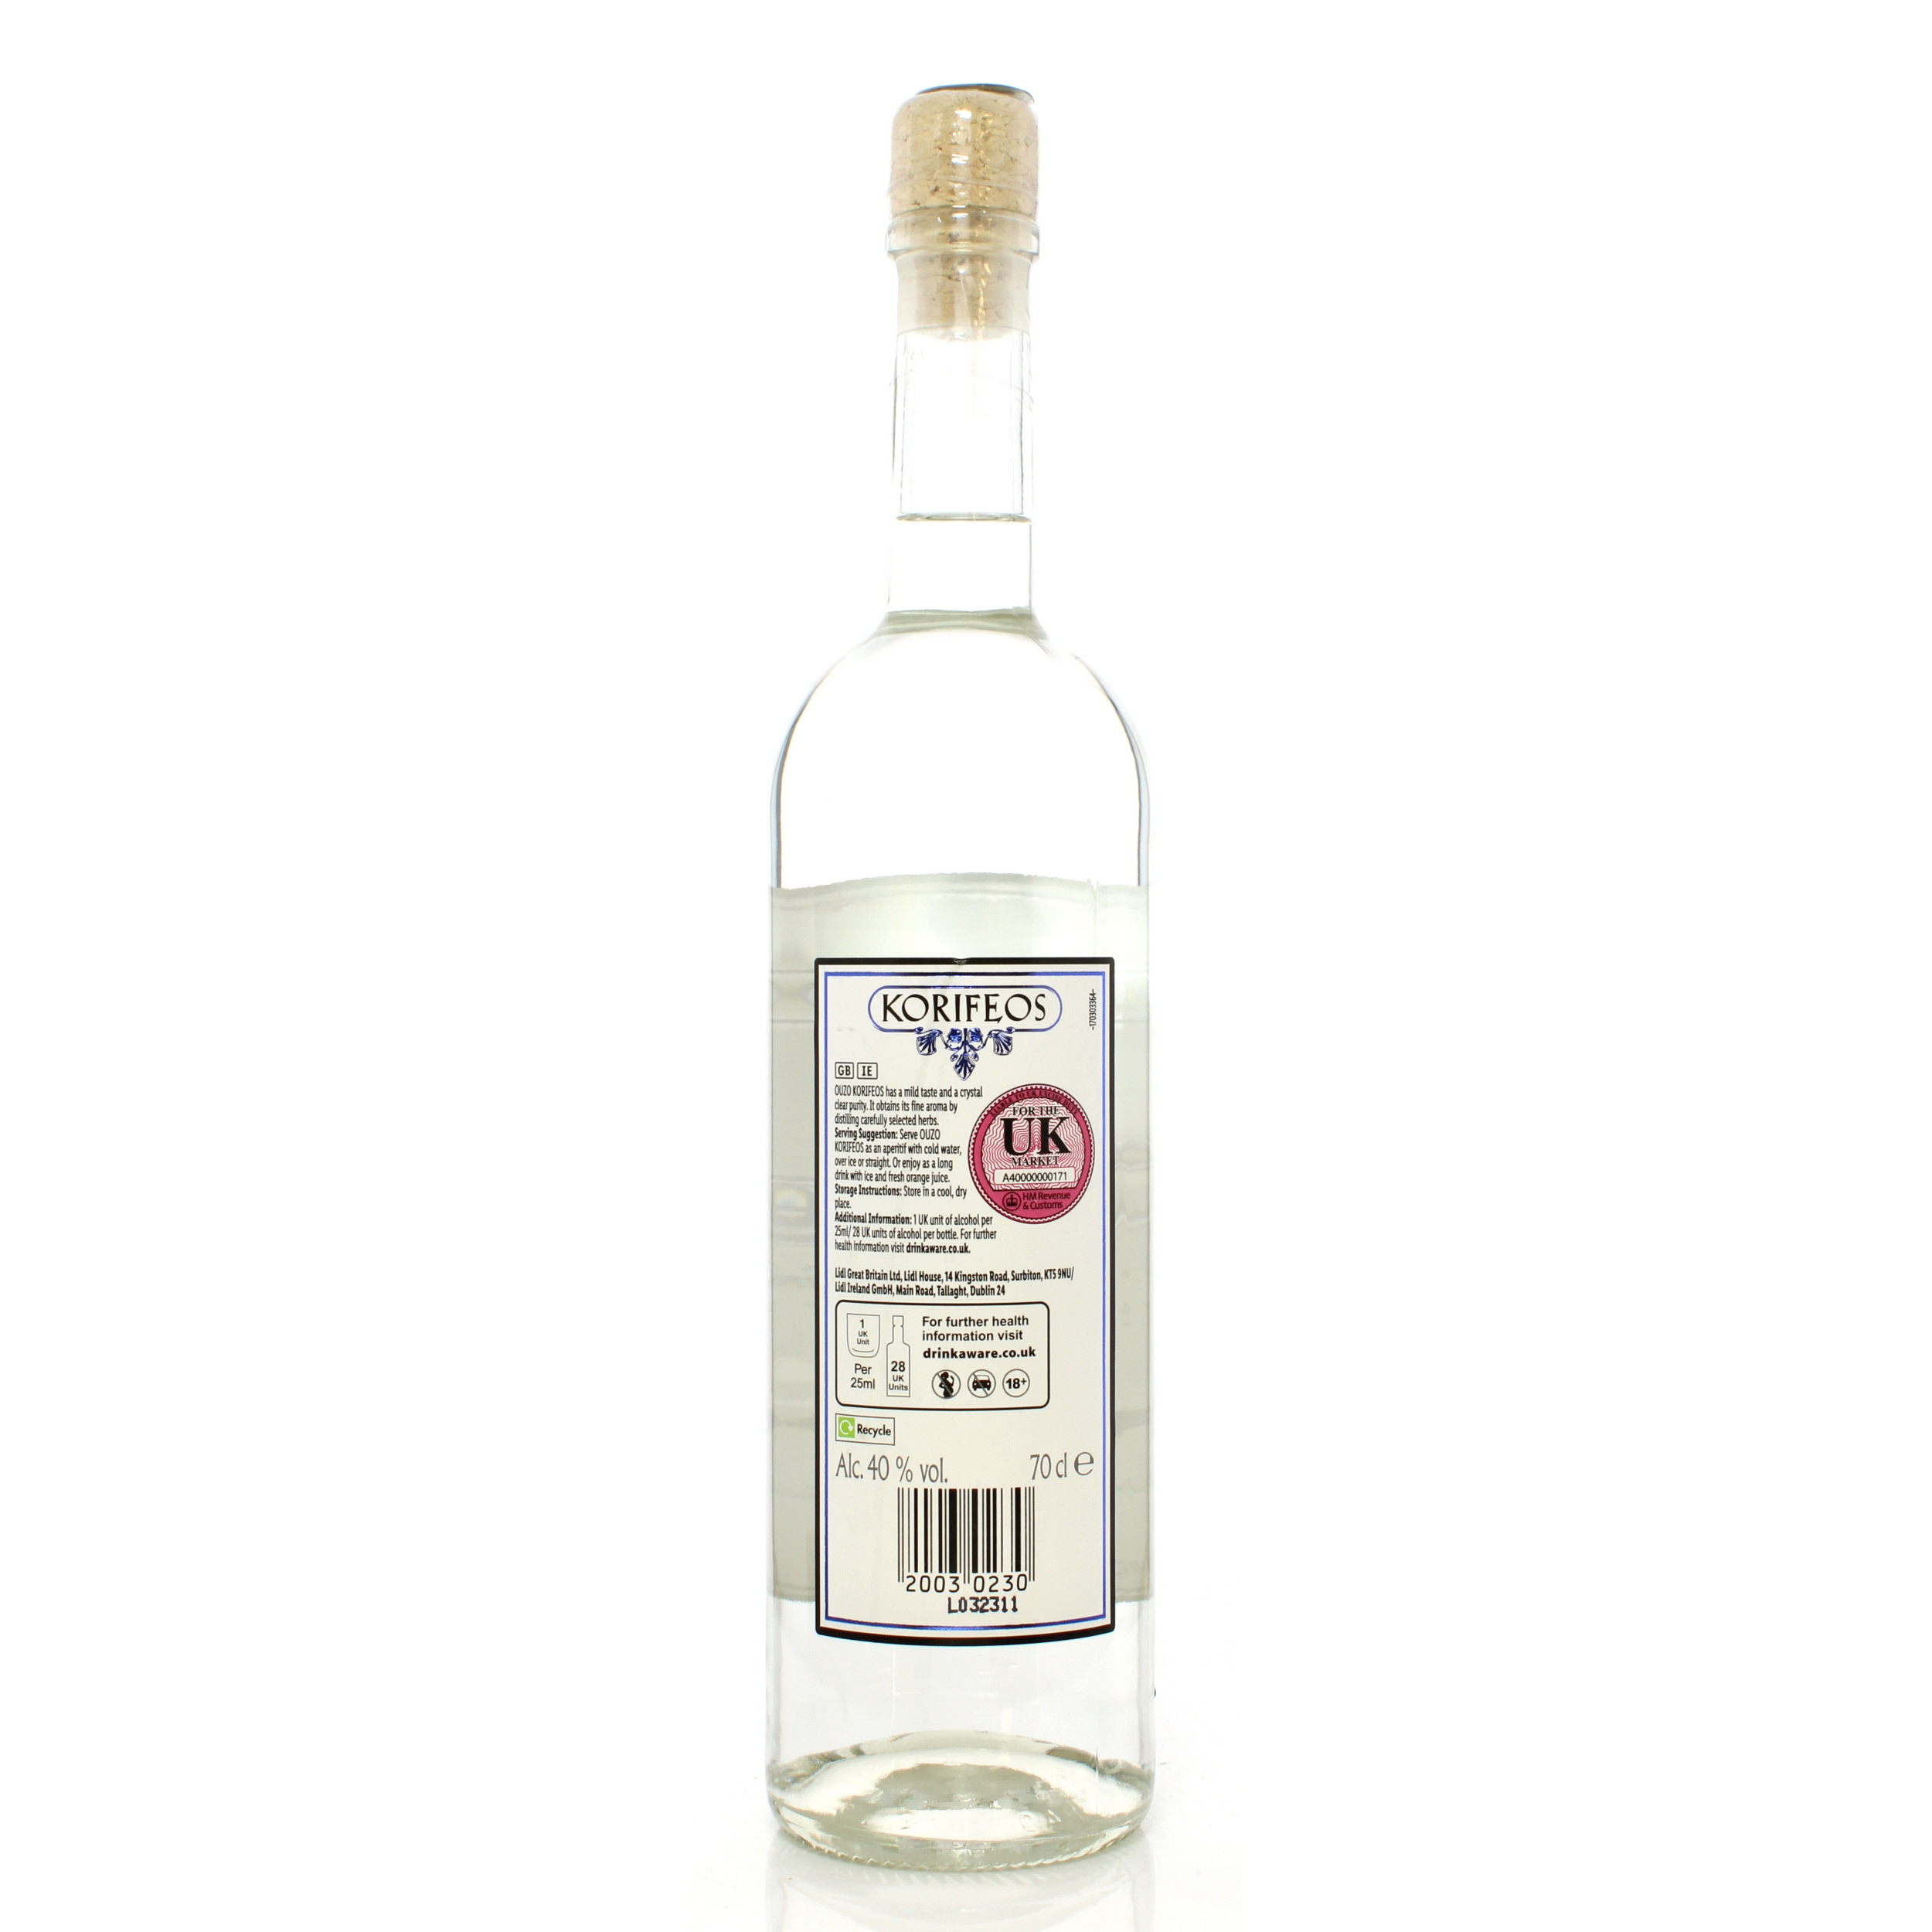 Whisky Korifeos Ouzo Auction The Shop | A56203 Auctions